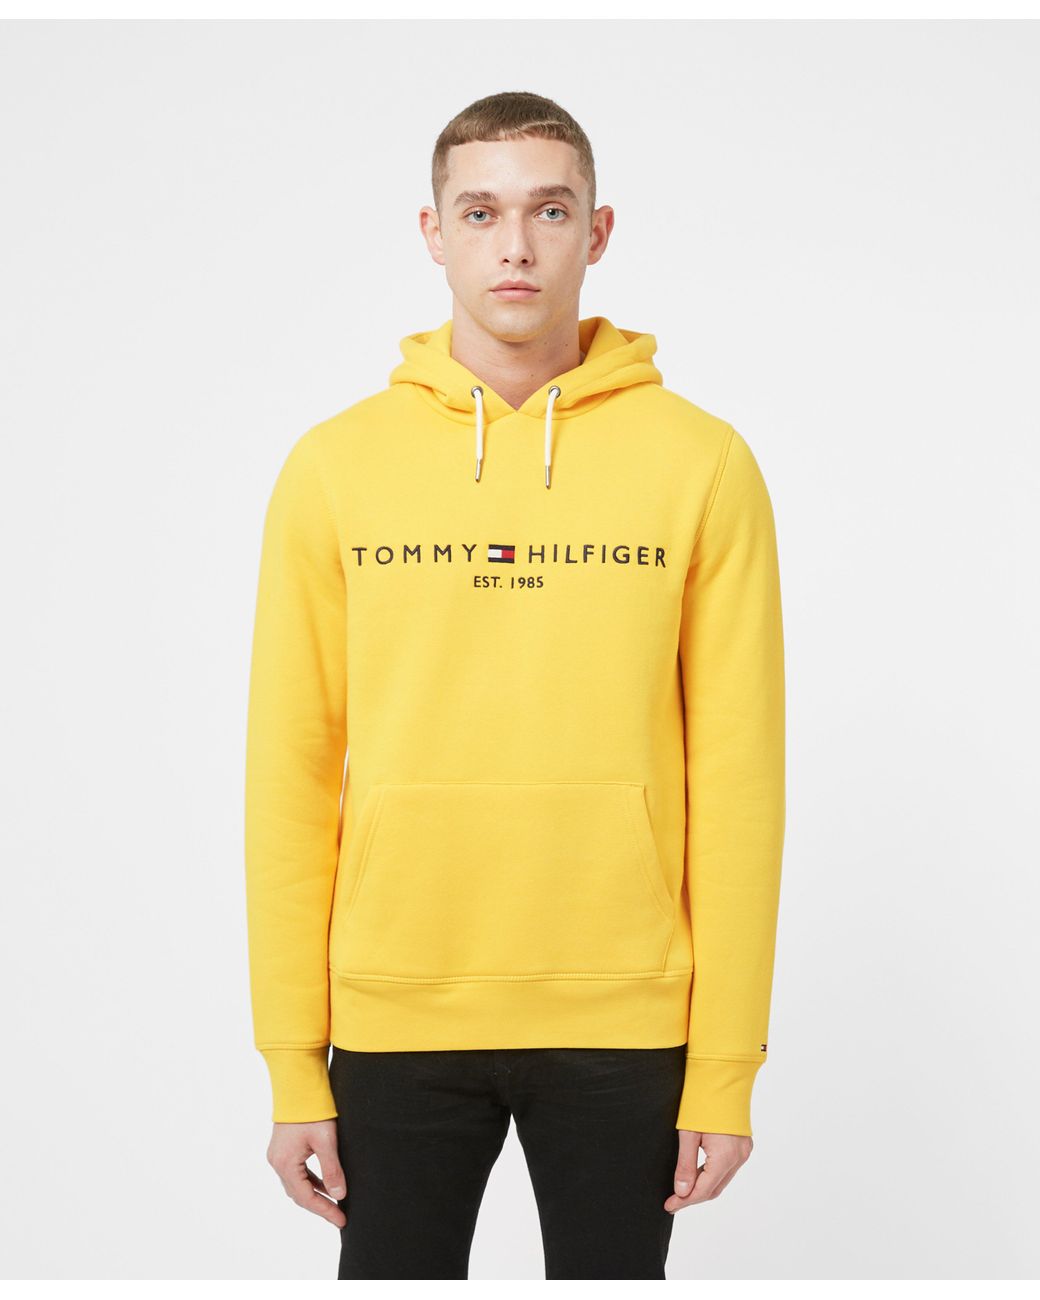 Tommy Hilfiger Logo Overhead Hoodie in Yellow for Men - Lyst